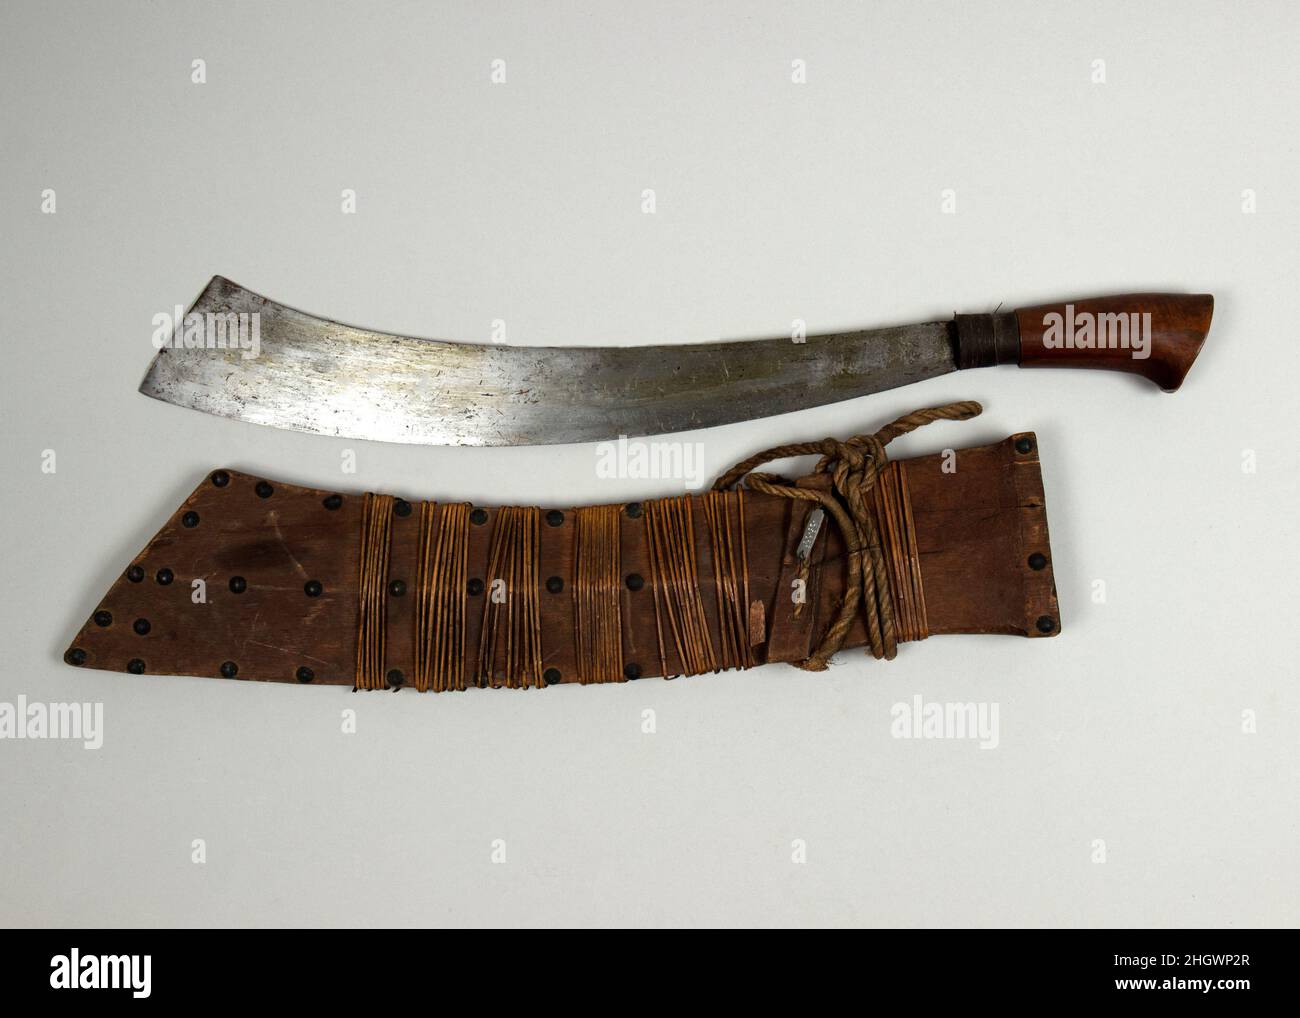 Jungle Knife with Sheath 18th–19th century Philippine, Yakan. Jungle Knife with Sheath. Philippine, Yakan. 18th–19th century. Steel, wood, brass, cane (rattan). Basilan. Knives Stock Photo